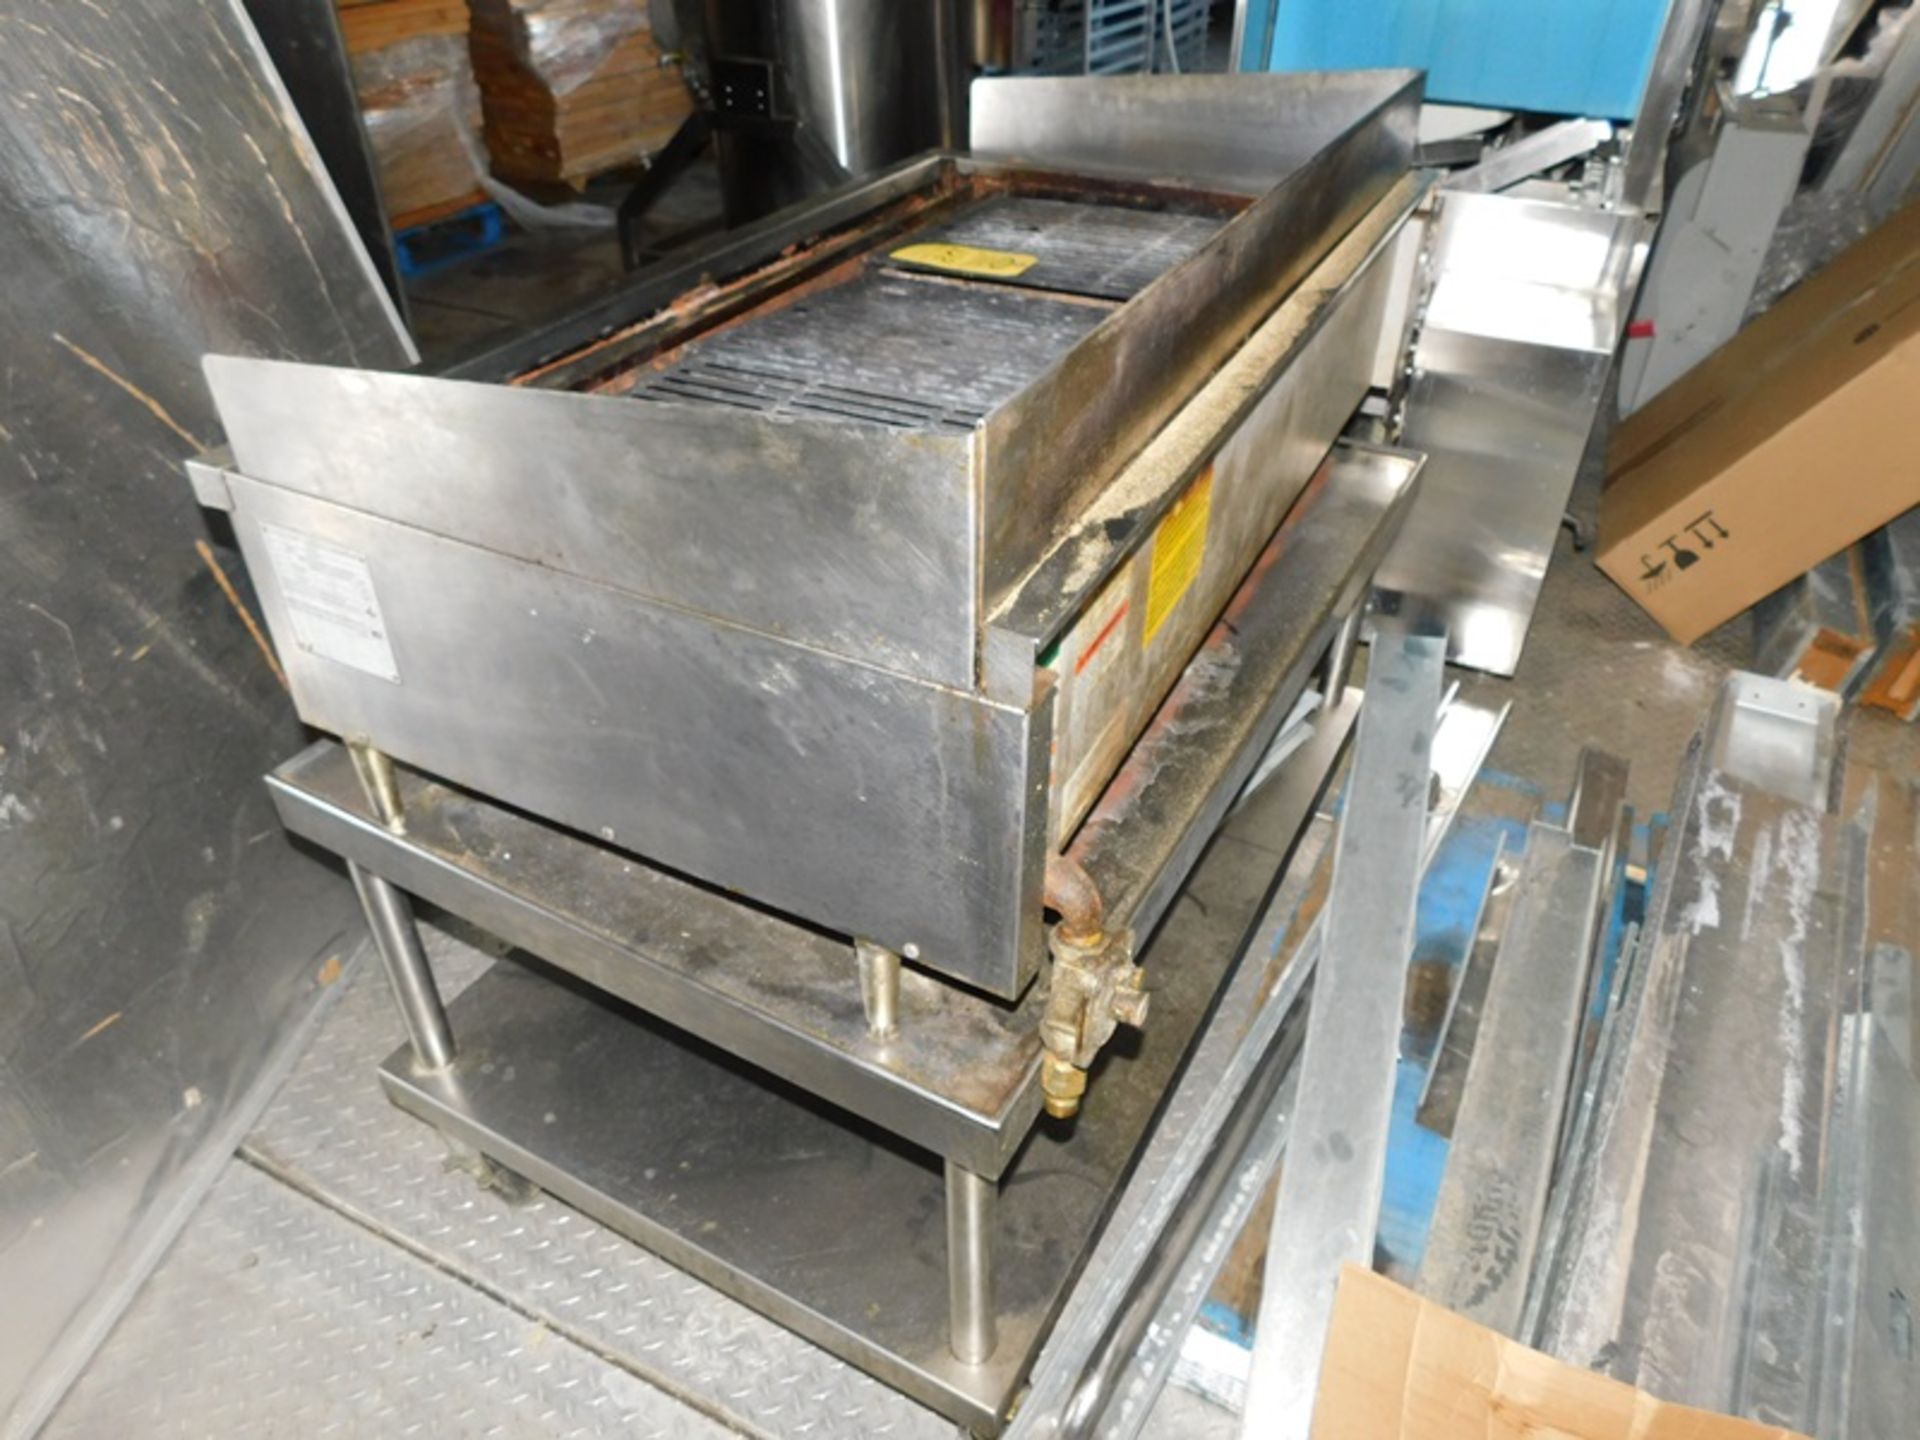 Vulcan Mdl. VCCB47 Grill, Ser. #650124787, 8-burner, 42" X 20", natural gas with portable cart - ( - Image 3 of 4